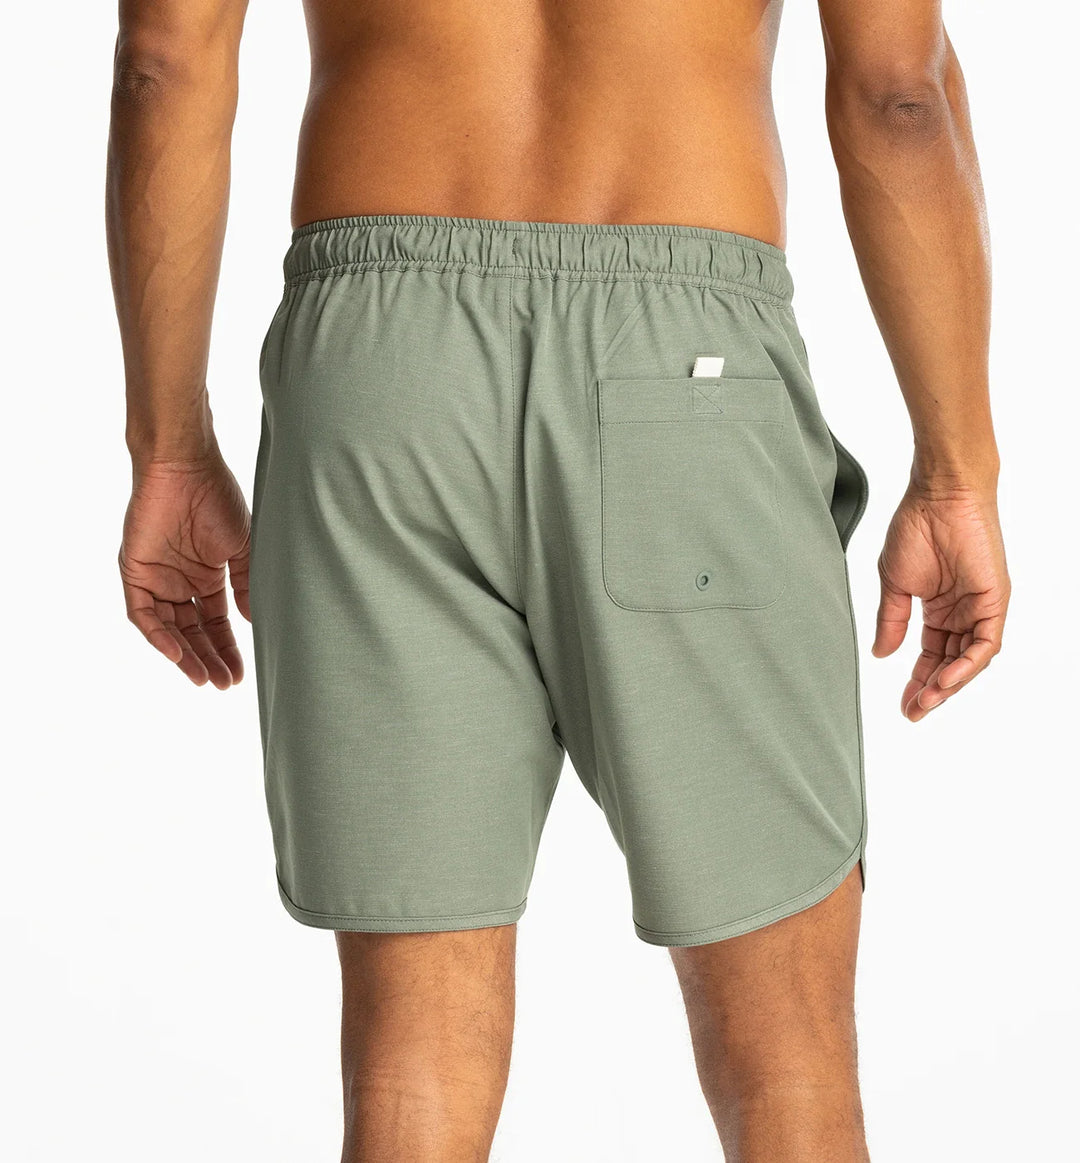 Free Fly Men's Reverb Short - AGAVE GREEN - Sun Diego Boardshop